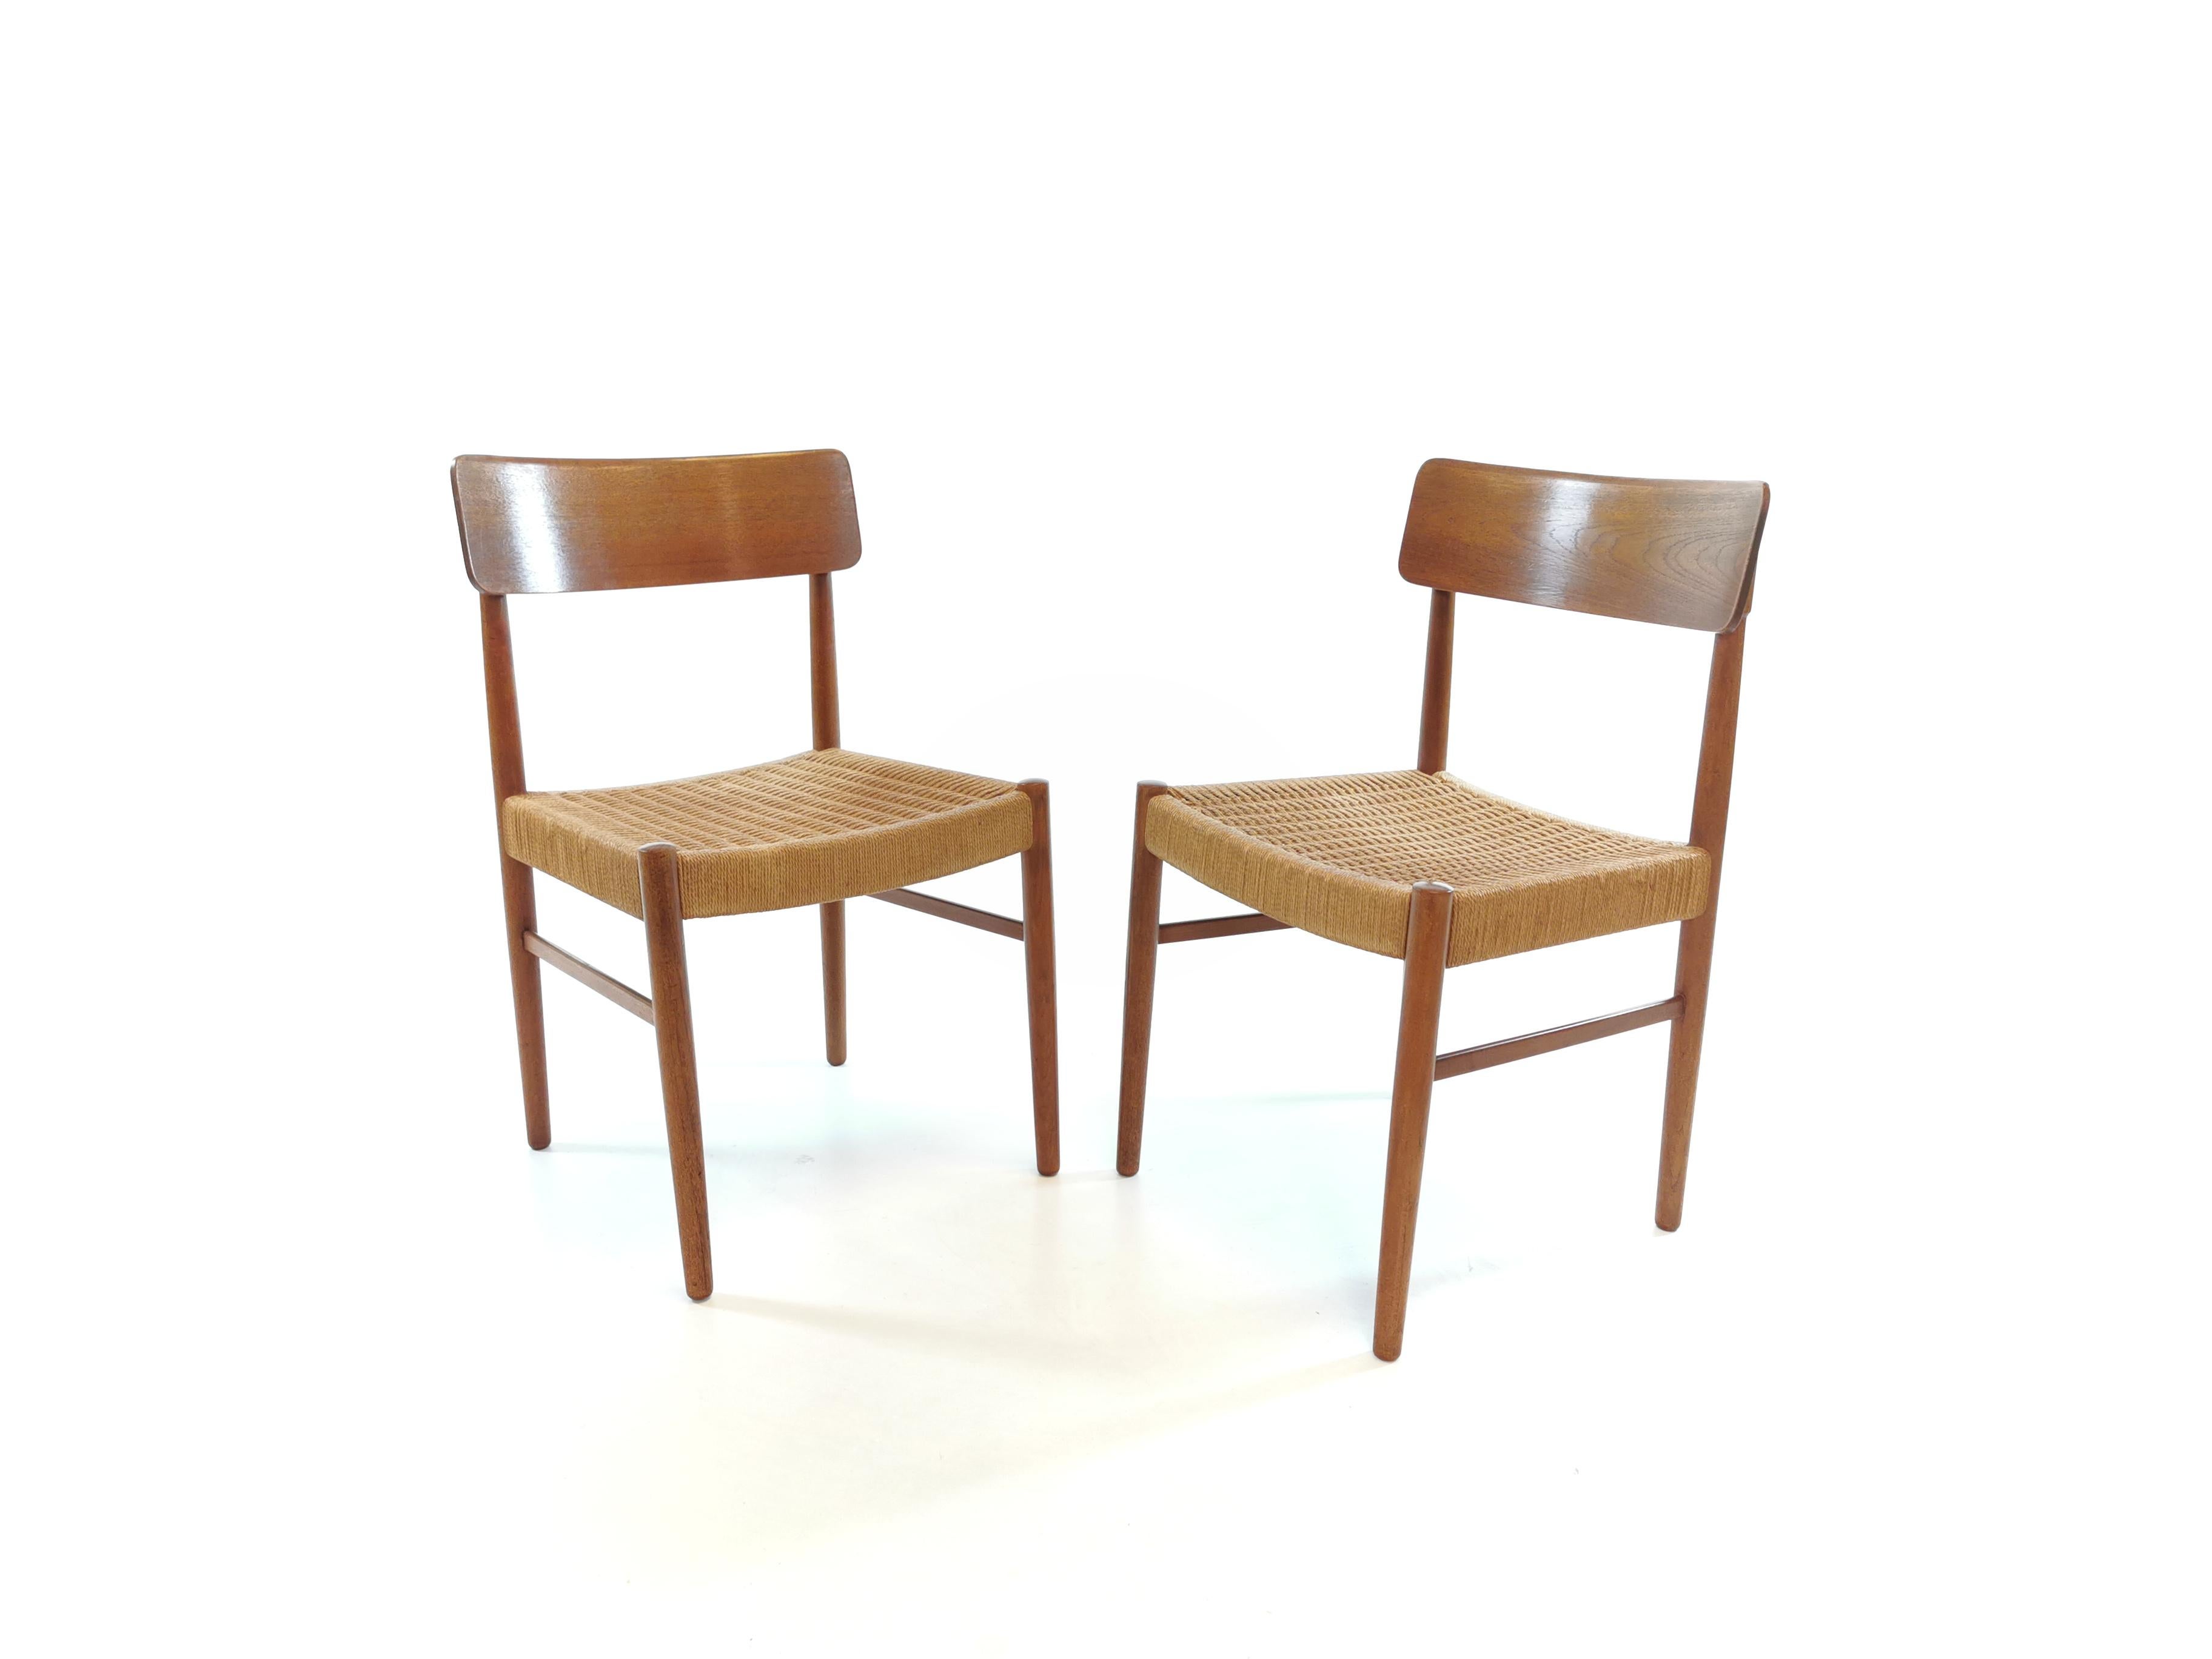 Two Danish paper cord chairs.

1960s. Teak and paper cord.

Very good condition. Structurally sound.